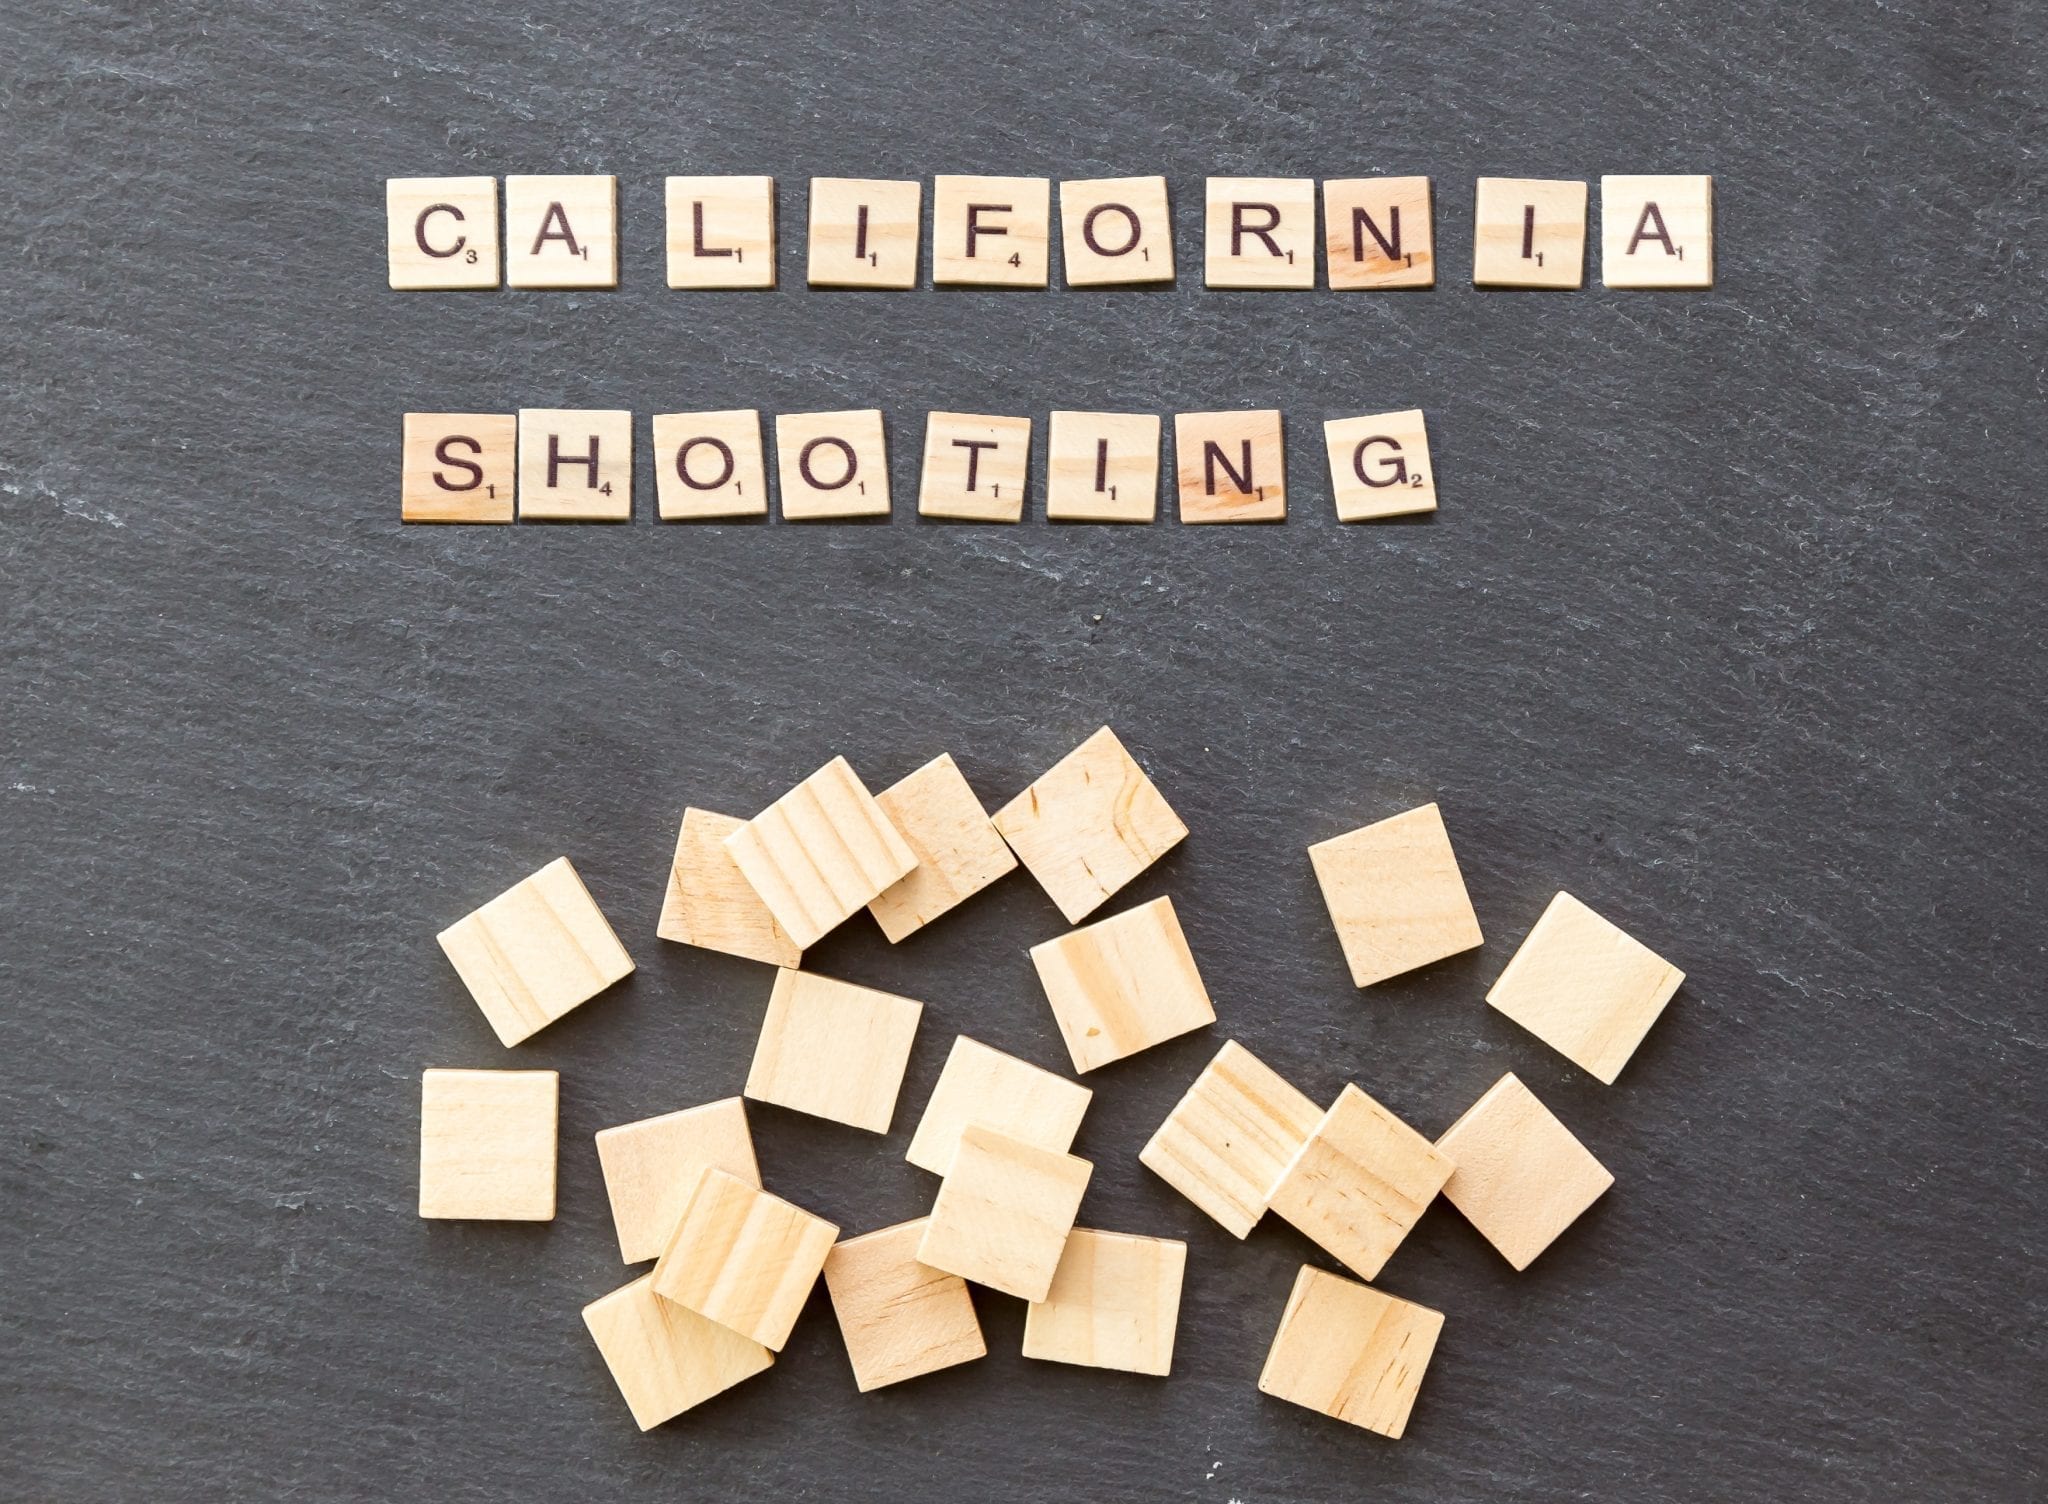 California school shootings; image by Marco Verch, via Flickr, CC BY 2.0, no changes made.